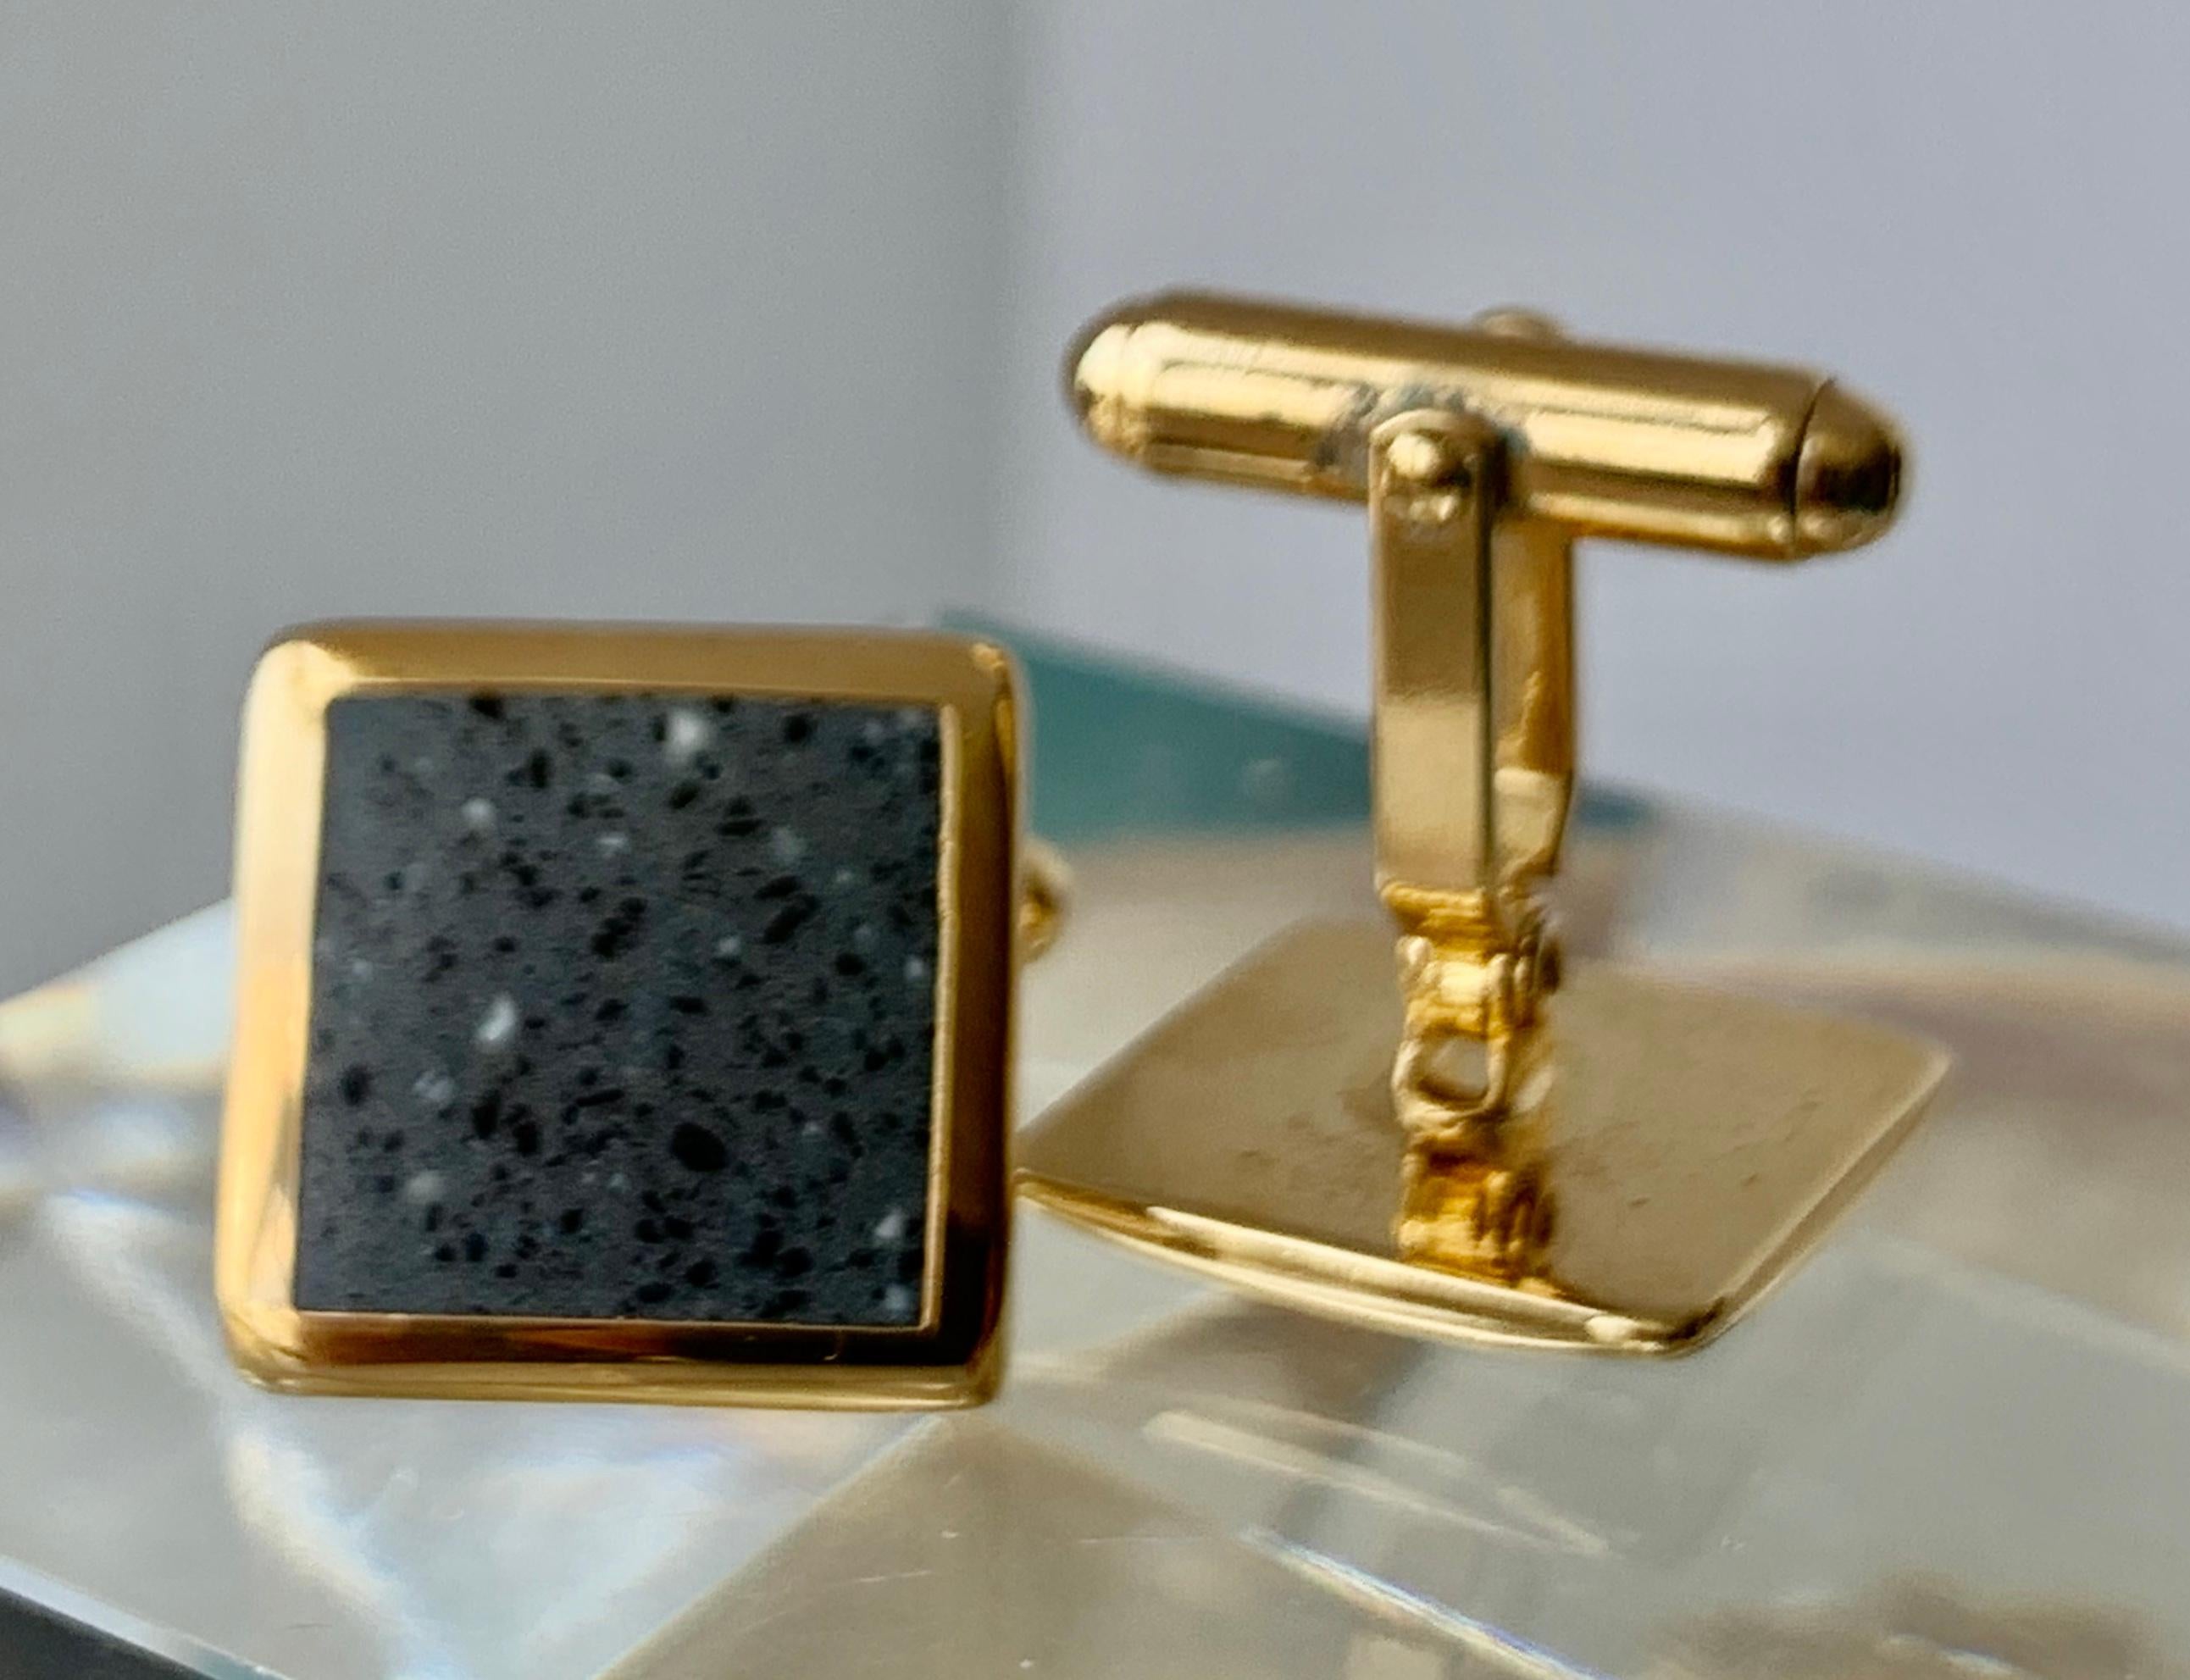 A pair of square shaped cufflinks with grey enamel speckled with black and white.  The frames are gold filled and have 